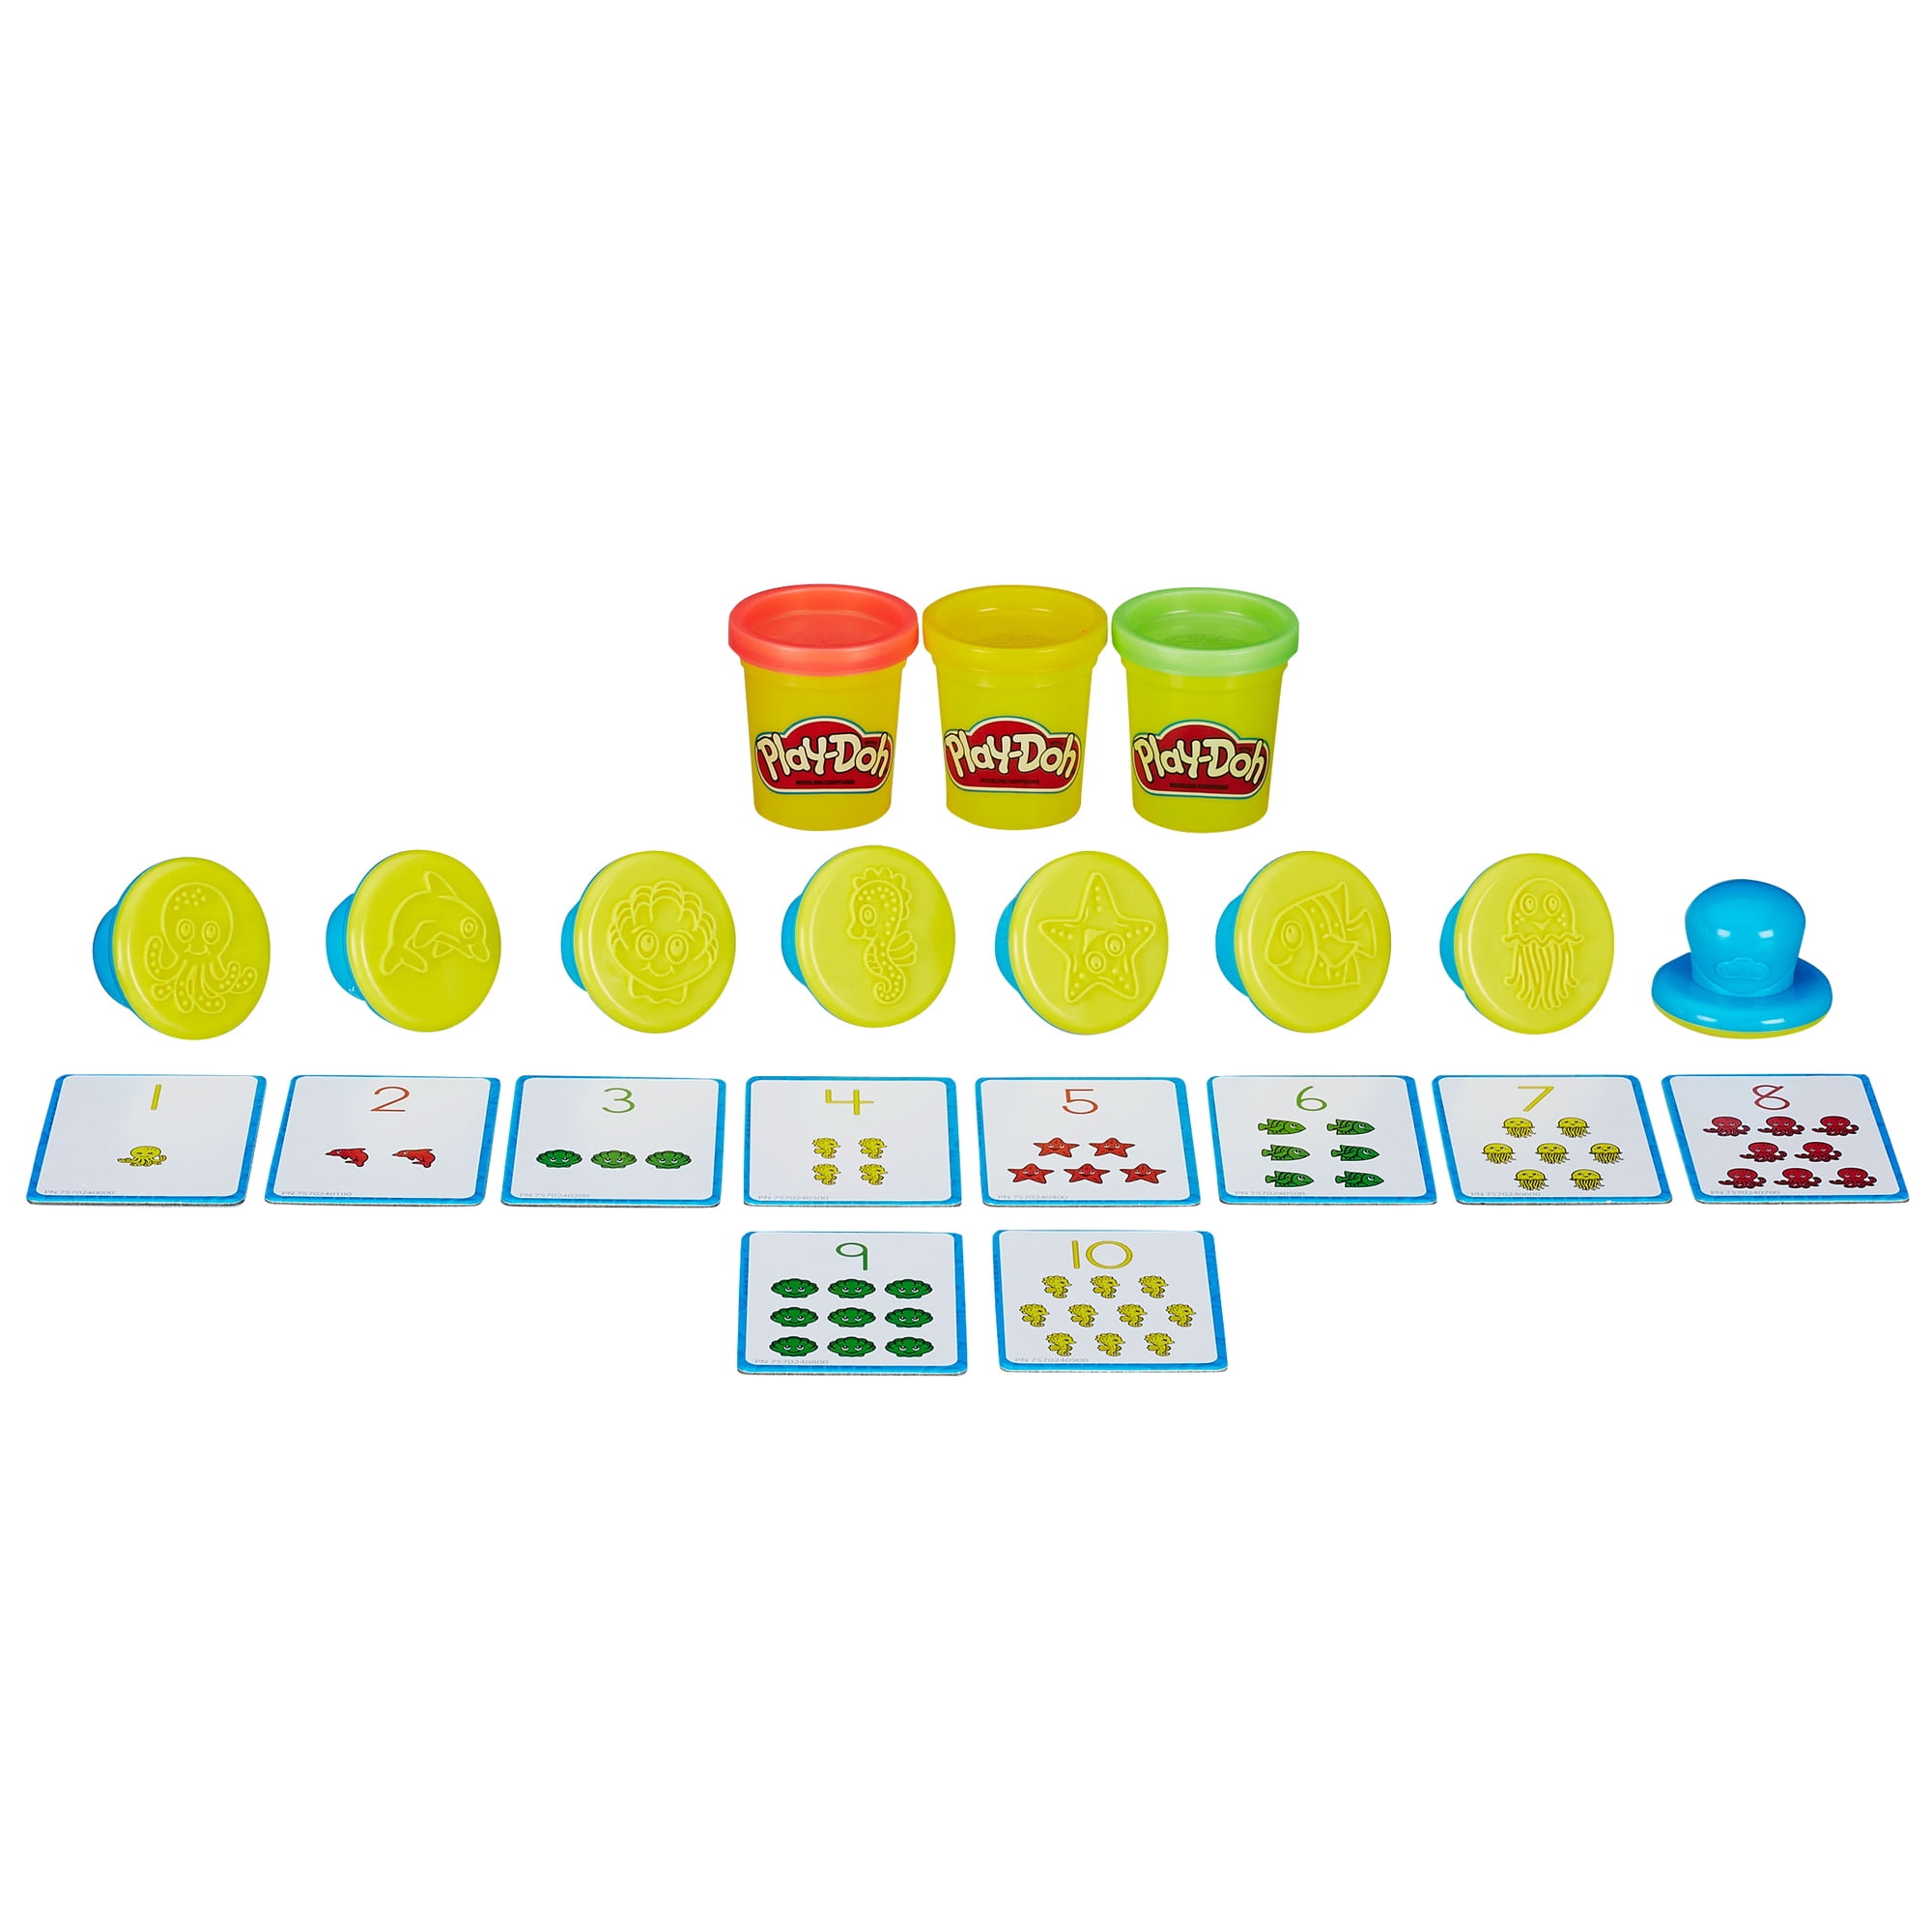 BRAND NEW Play-Doh Shape and Learn Numbers and Counting 